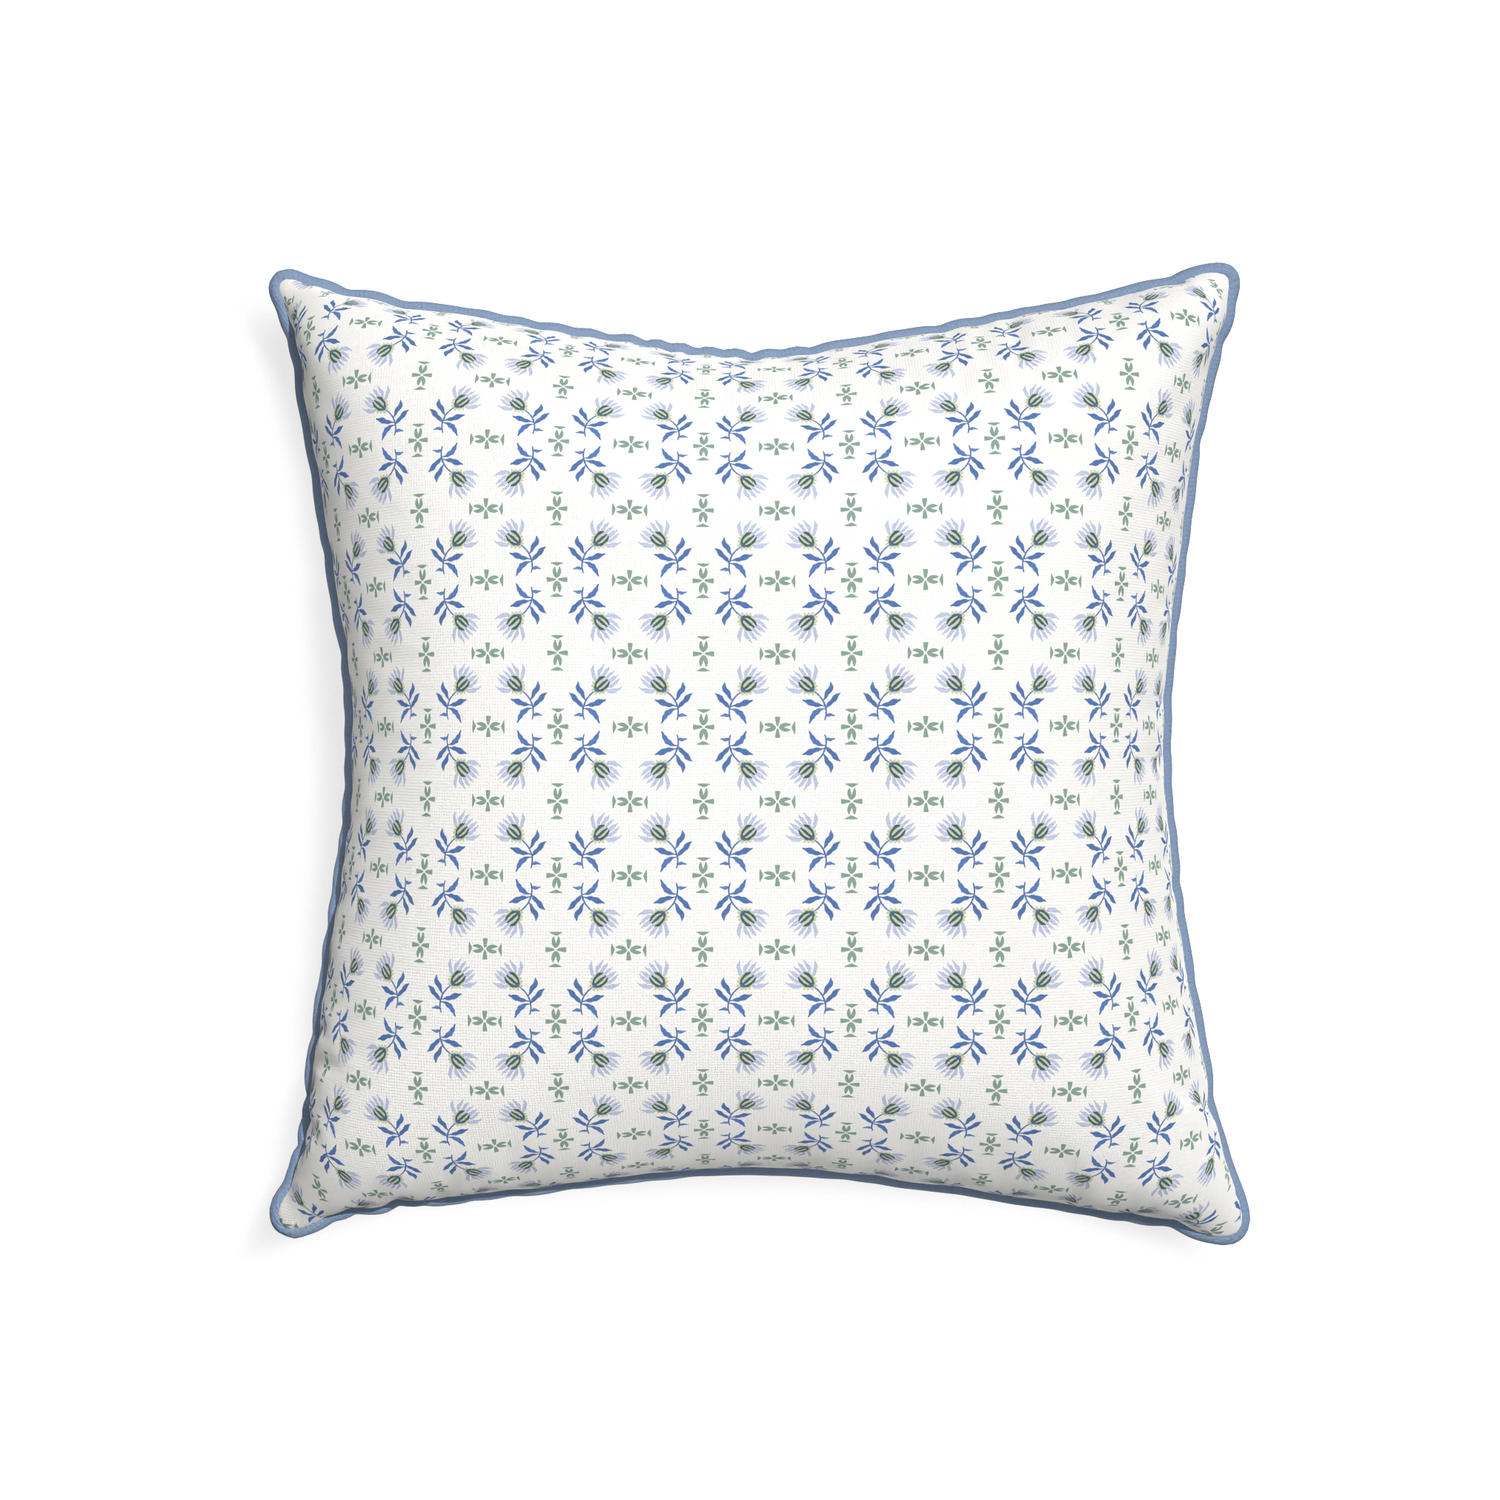 22-square lee custom pillow with sky piping on white background